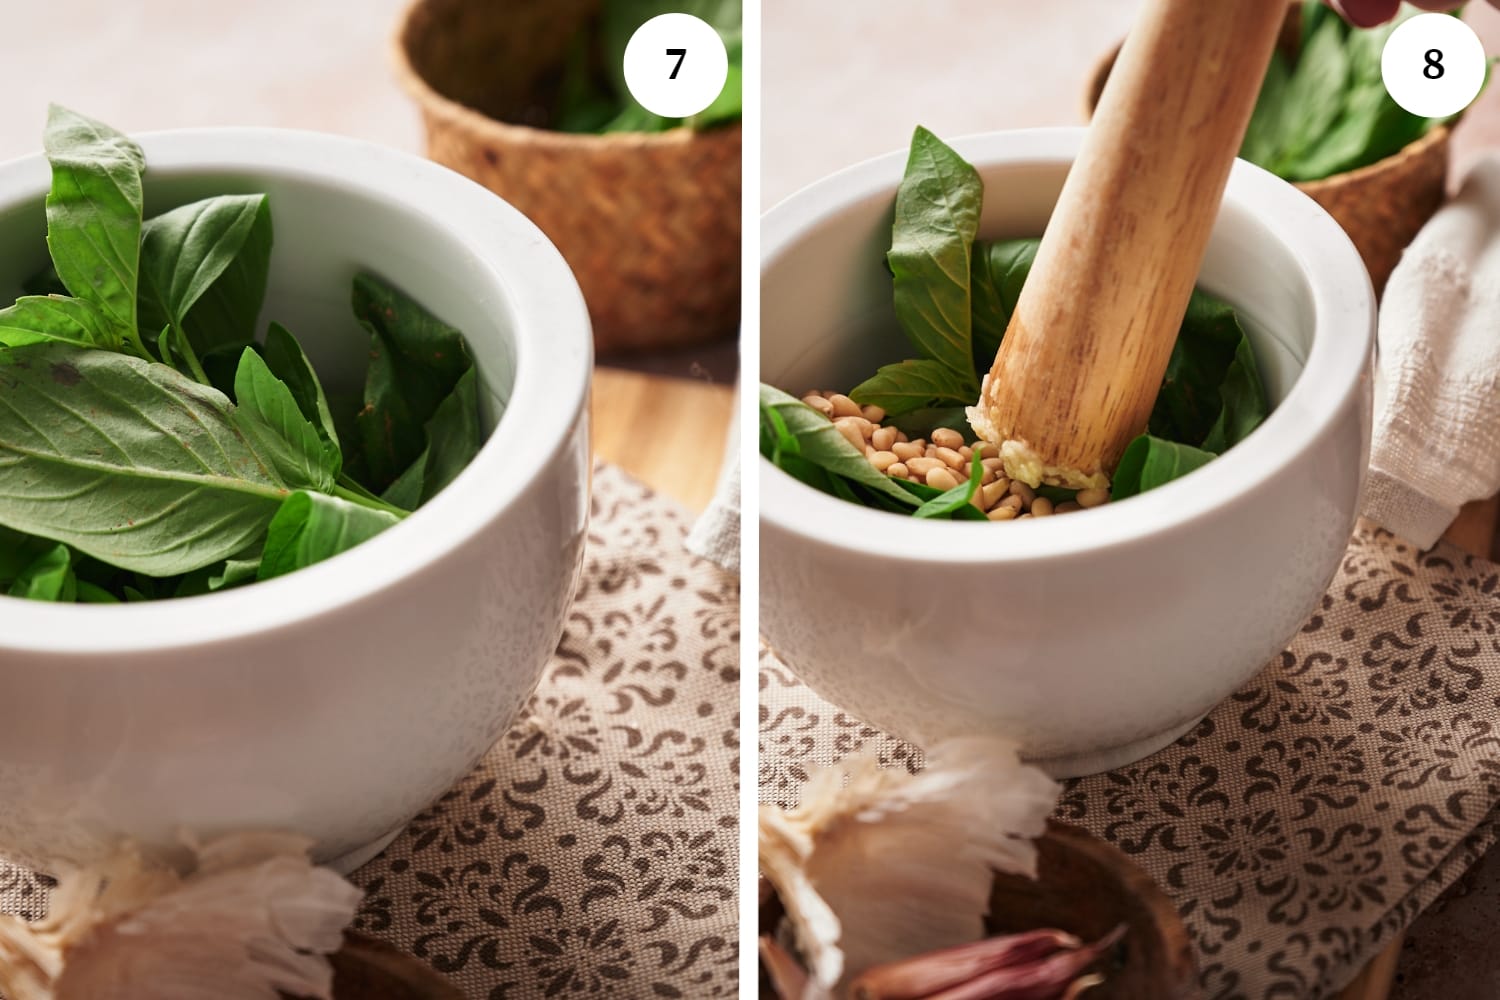 pesto procedure: first photo pestle with fresh basil leaves. second photo, mortar and pestle with fresh basil leaves, pine nuts inside.